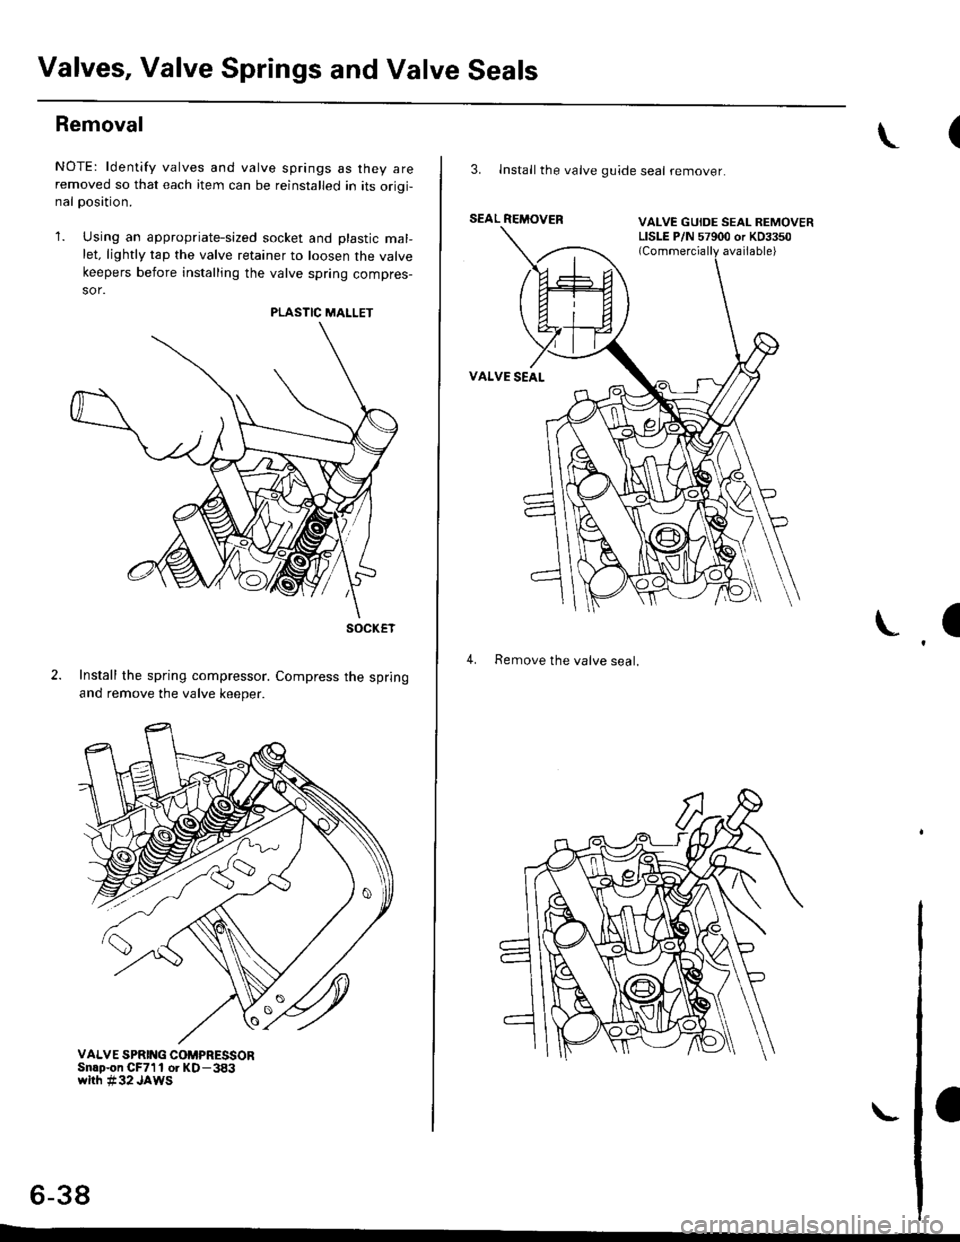 HONDA CIVIC 1998 6.G Workshop Manual Valves, Valve Springs and Valve Seals
Removal
NOTE: ldentify valves and valve springs as they areremoved so that each item can be reinstalled in its orioi-nal oosition.
1. Using an appropriate-sized 